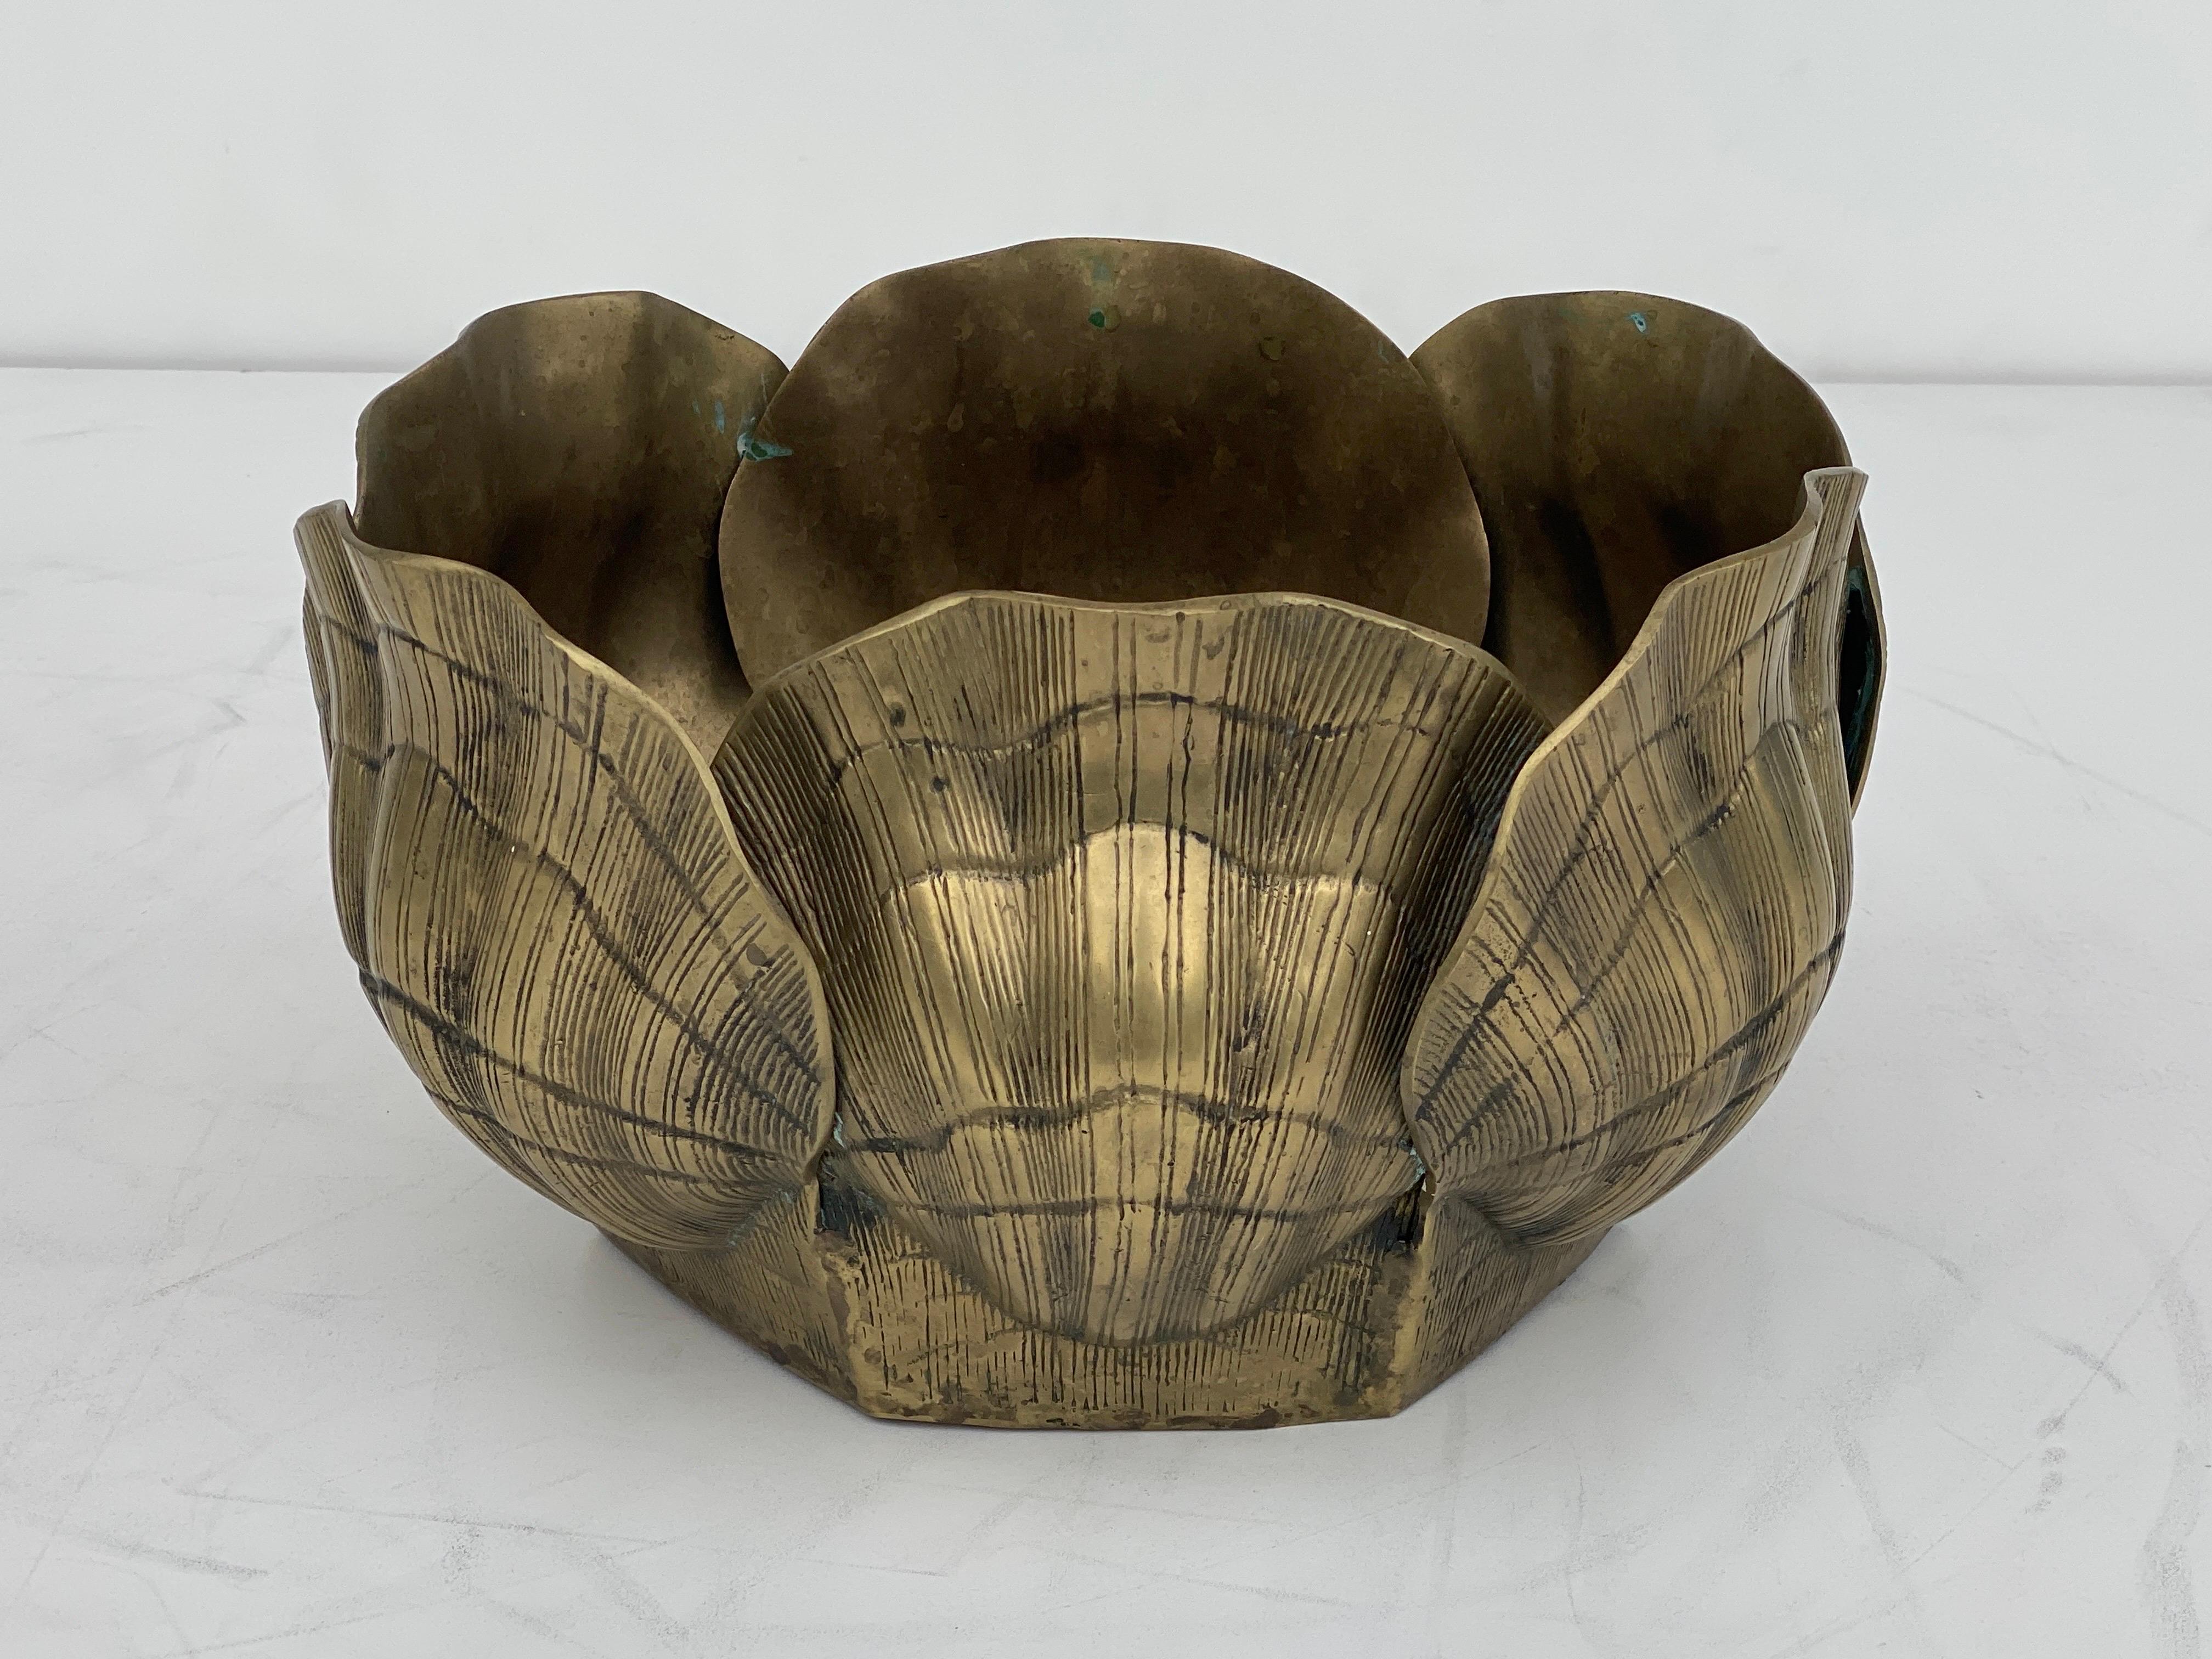 Large patinated brass sea shell planter. Some tarnishing and age spots characteristic to brass.